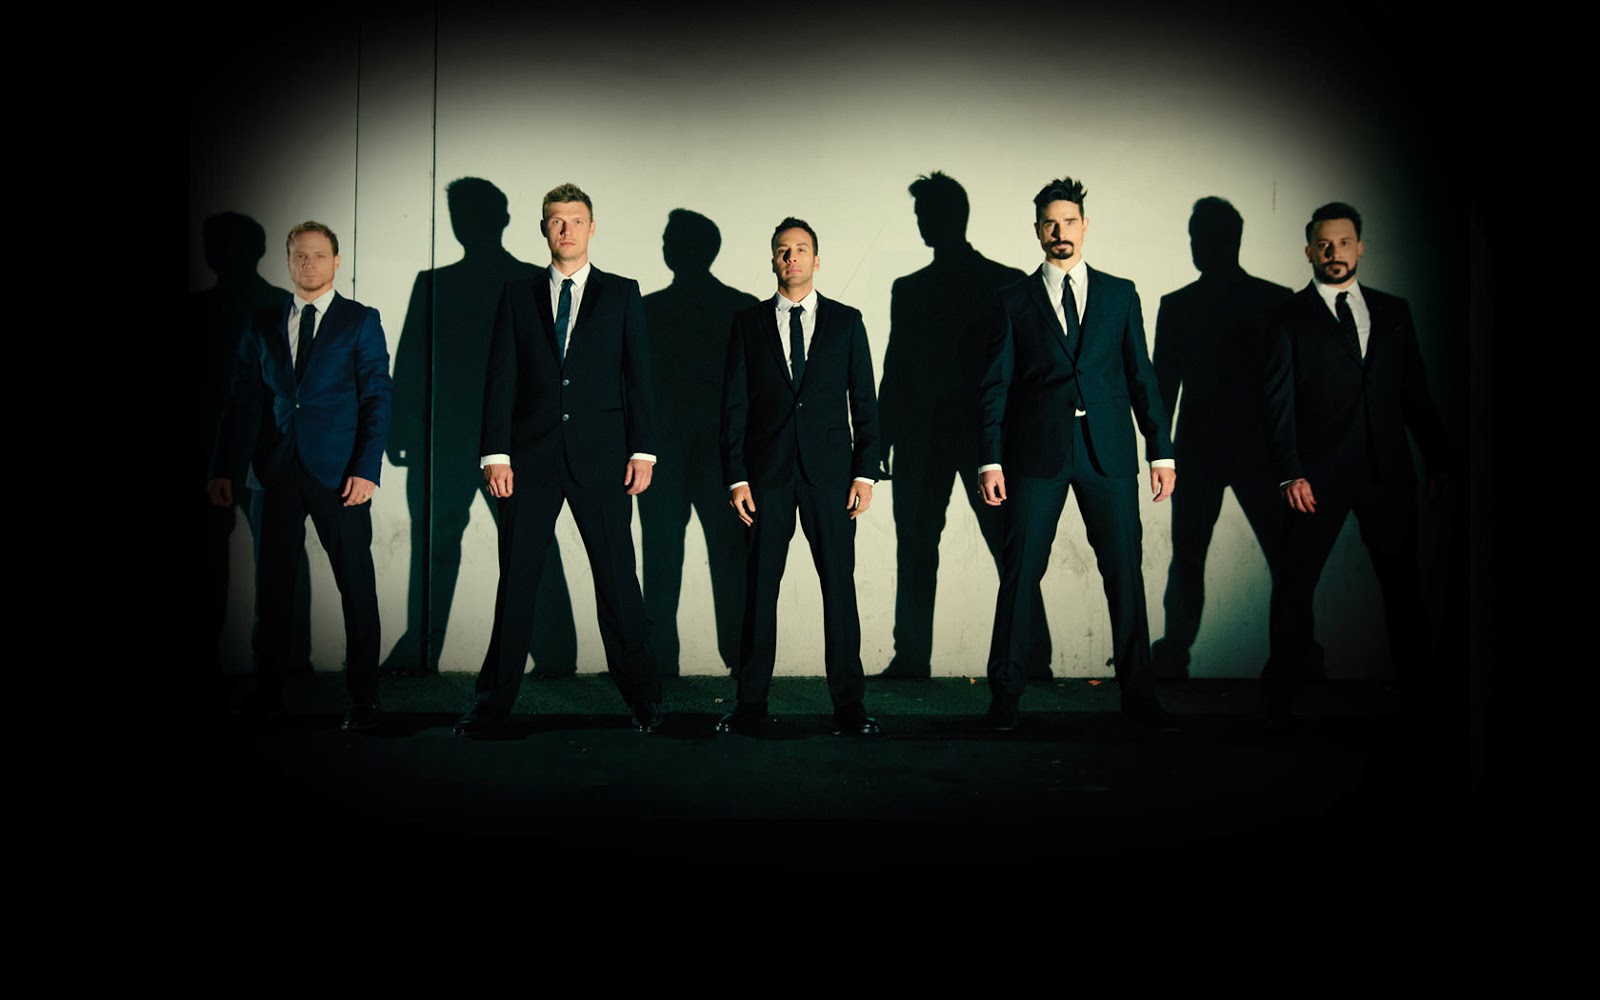 Backstreet boys incomplete. Backstreet boys in a World like this. Backstreet boys show me the meaning of being Lonely.